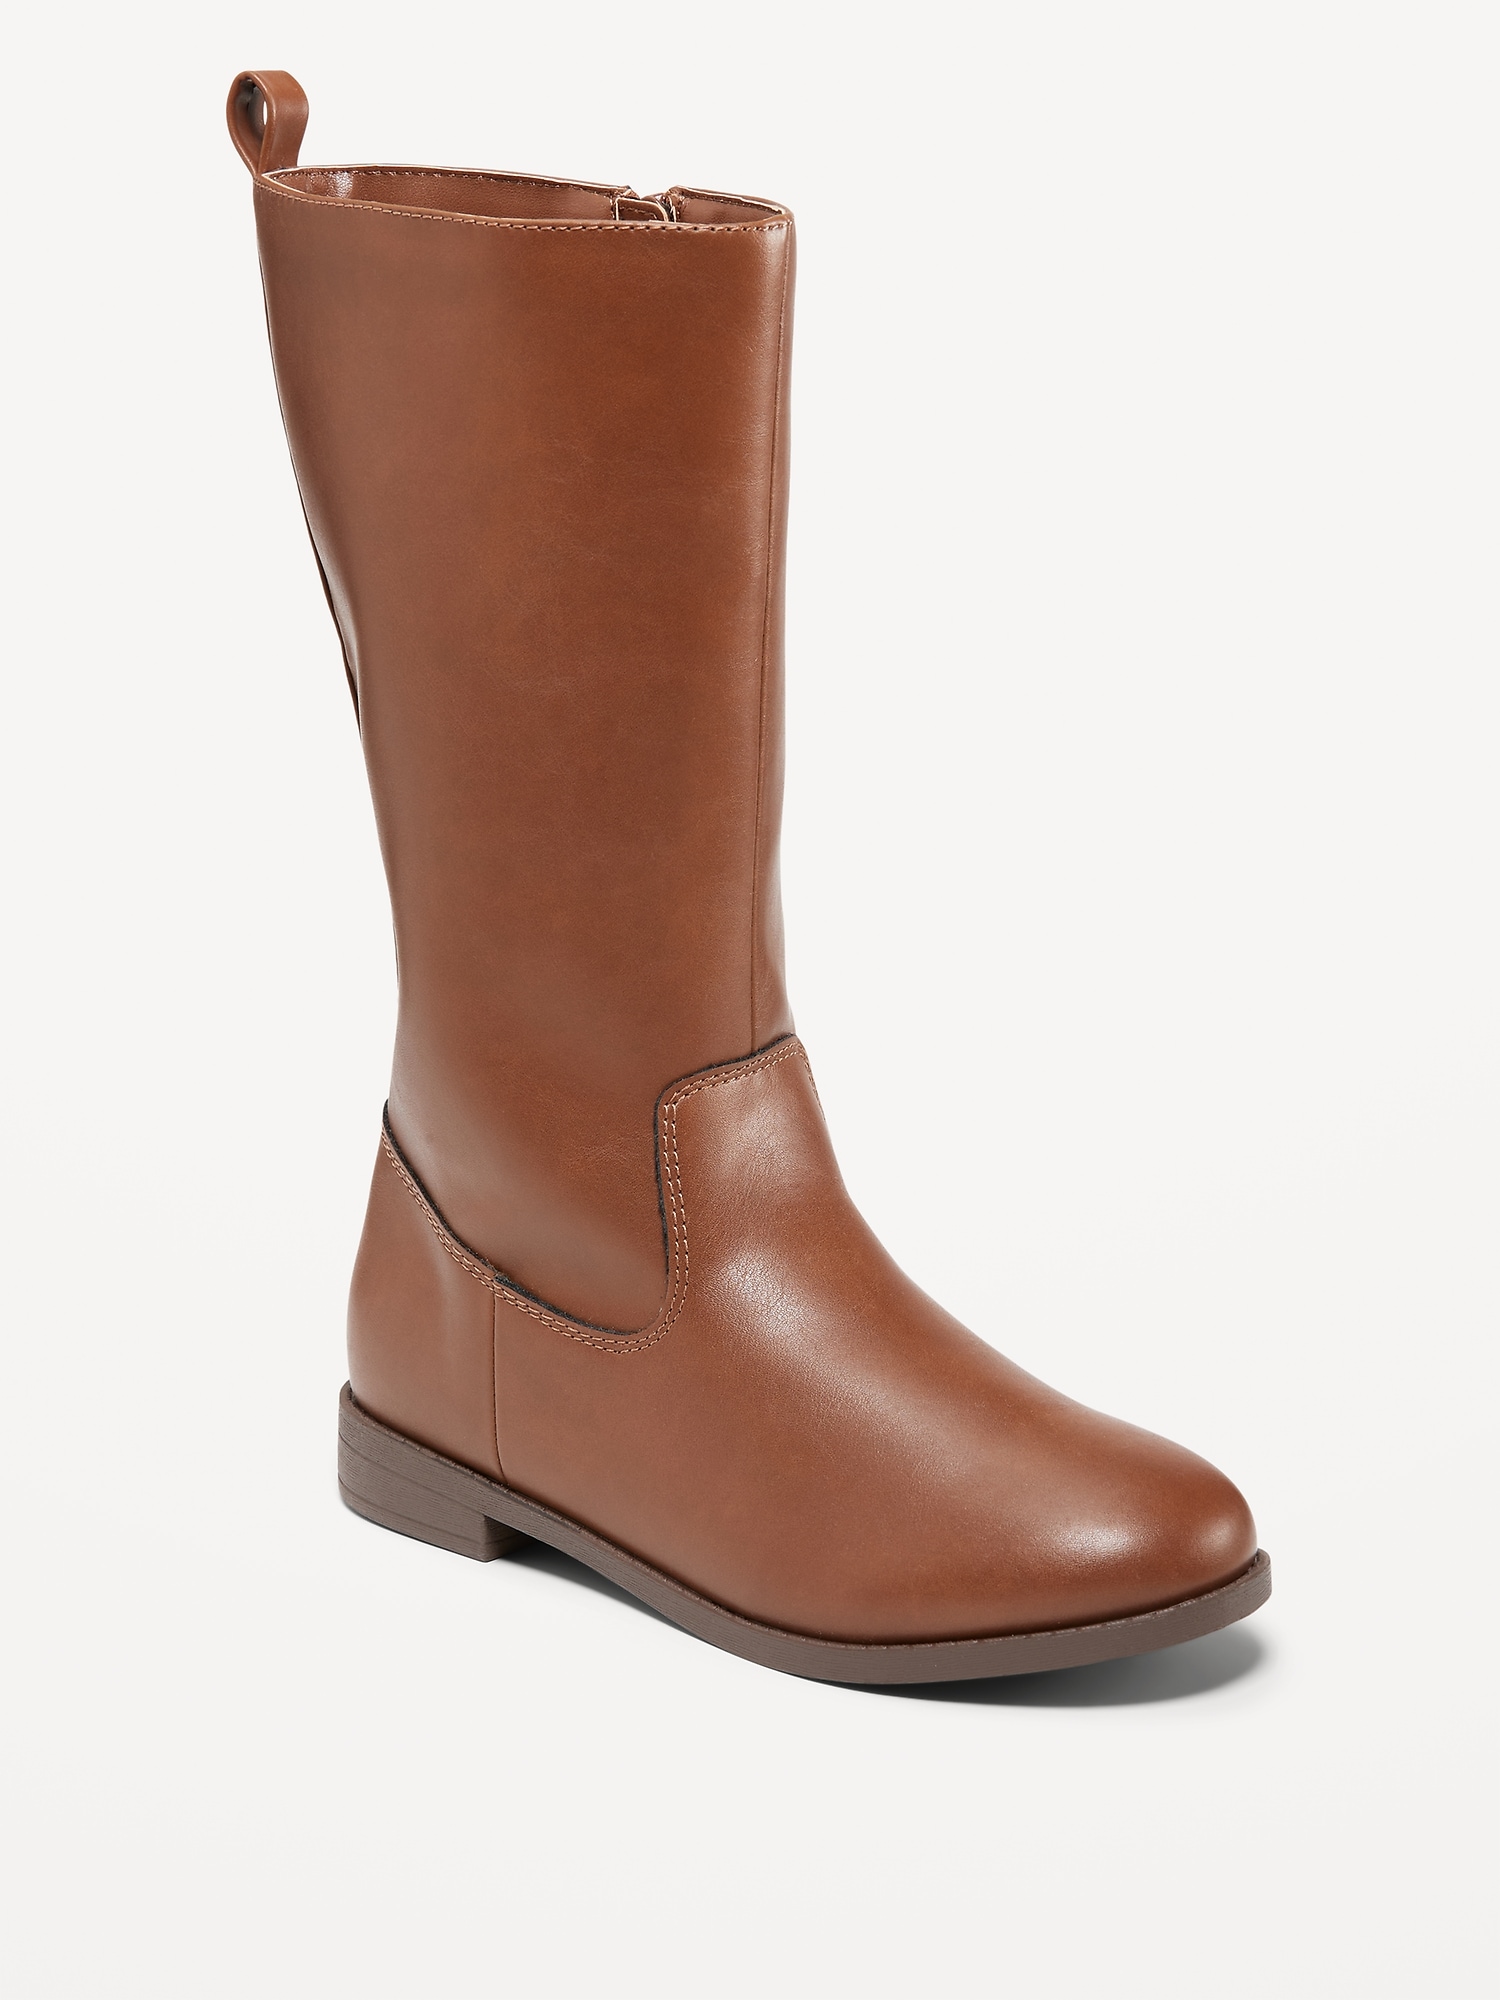 Tall Faux-Leather Boots for Girls